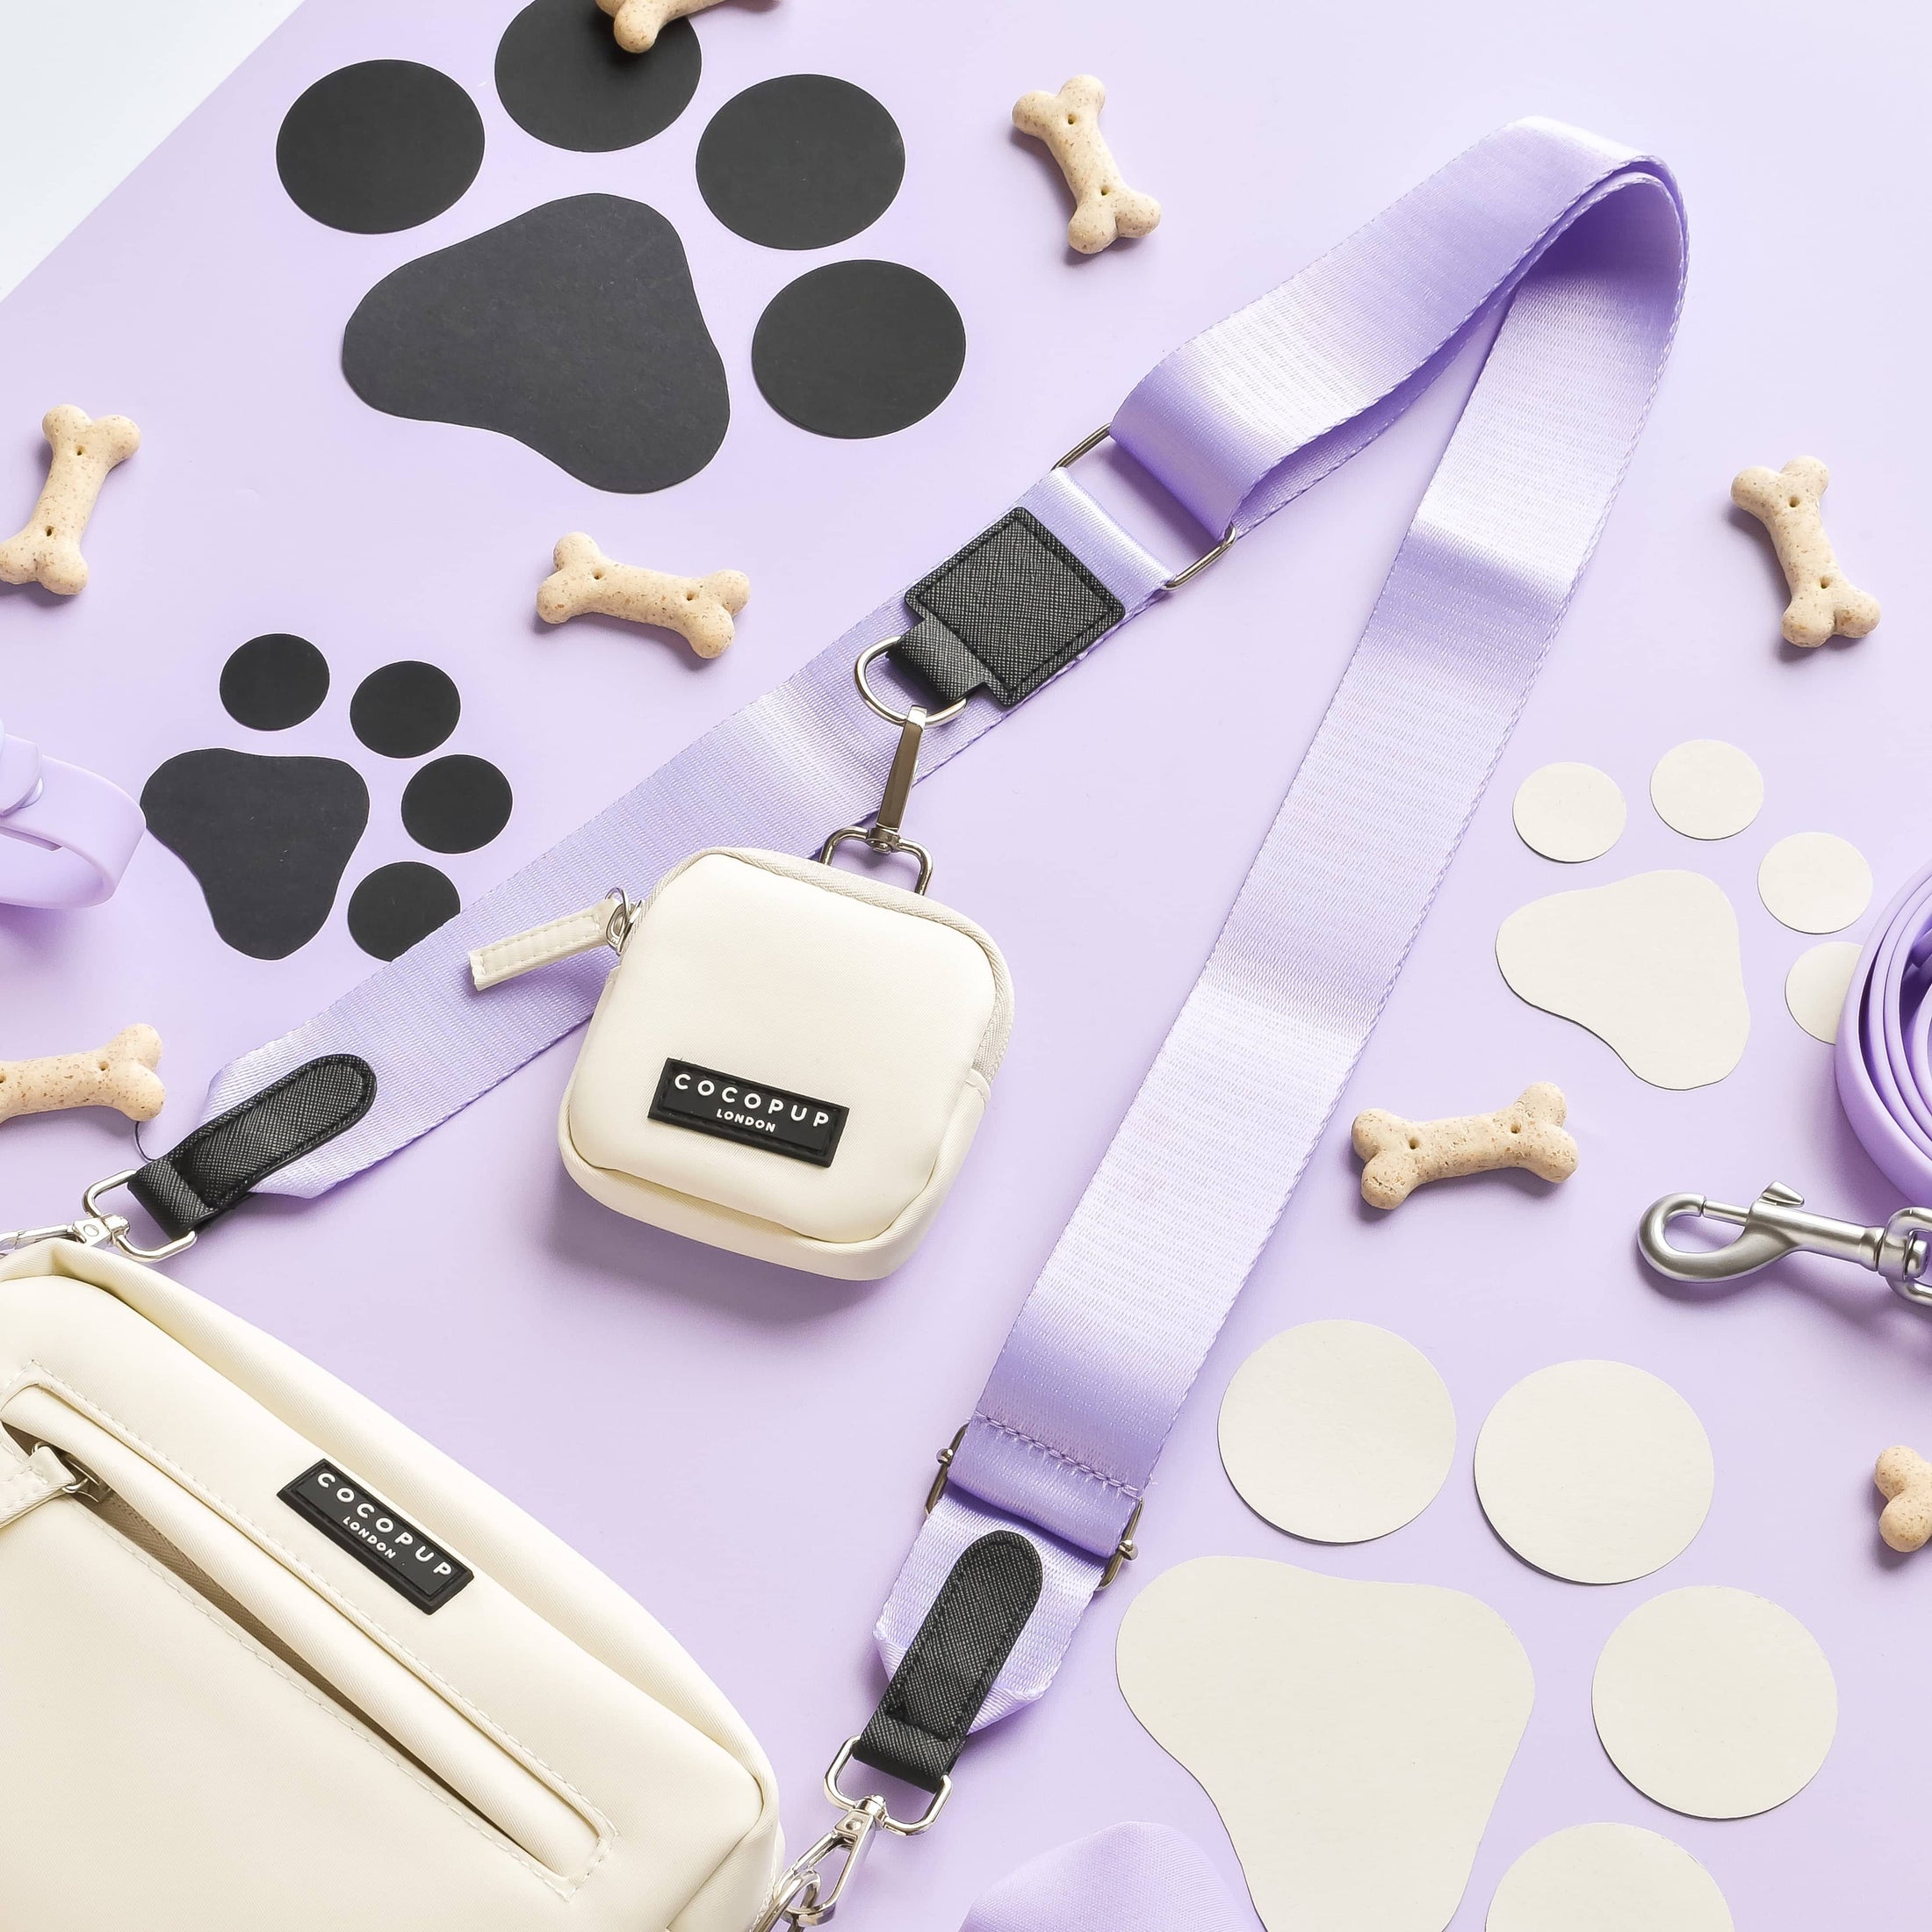 Cocopup Bag White with Violets Strap